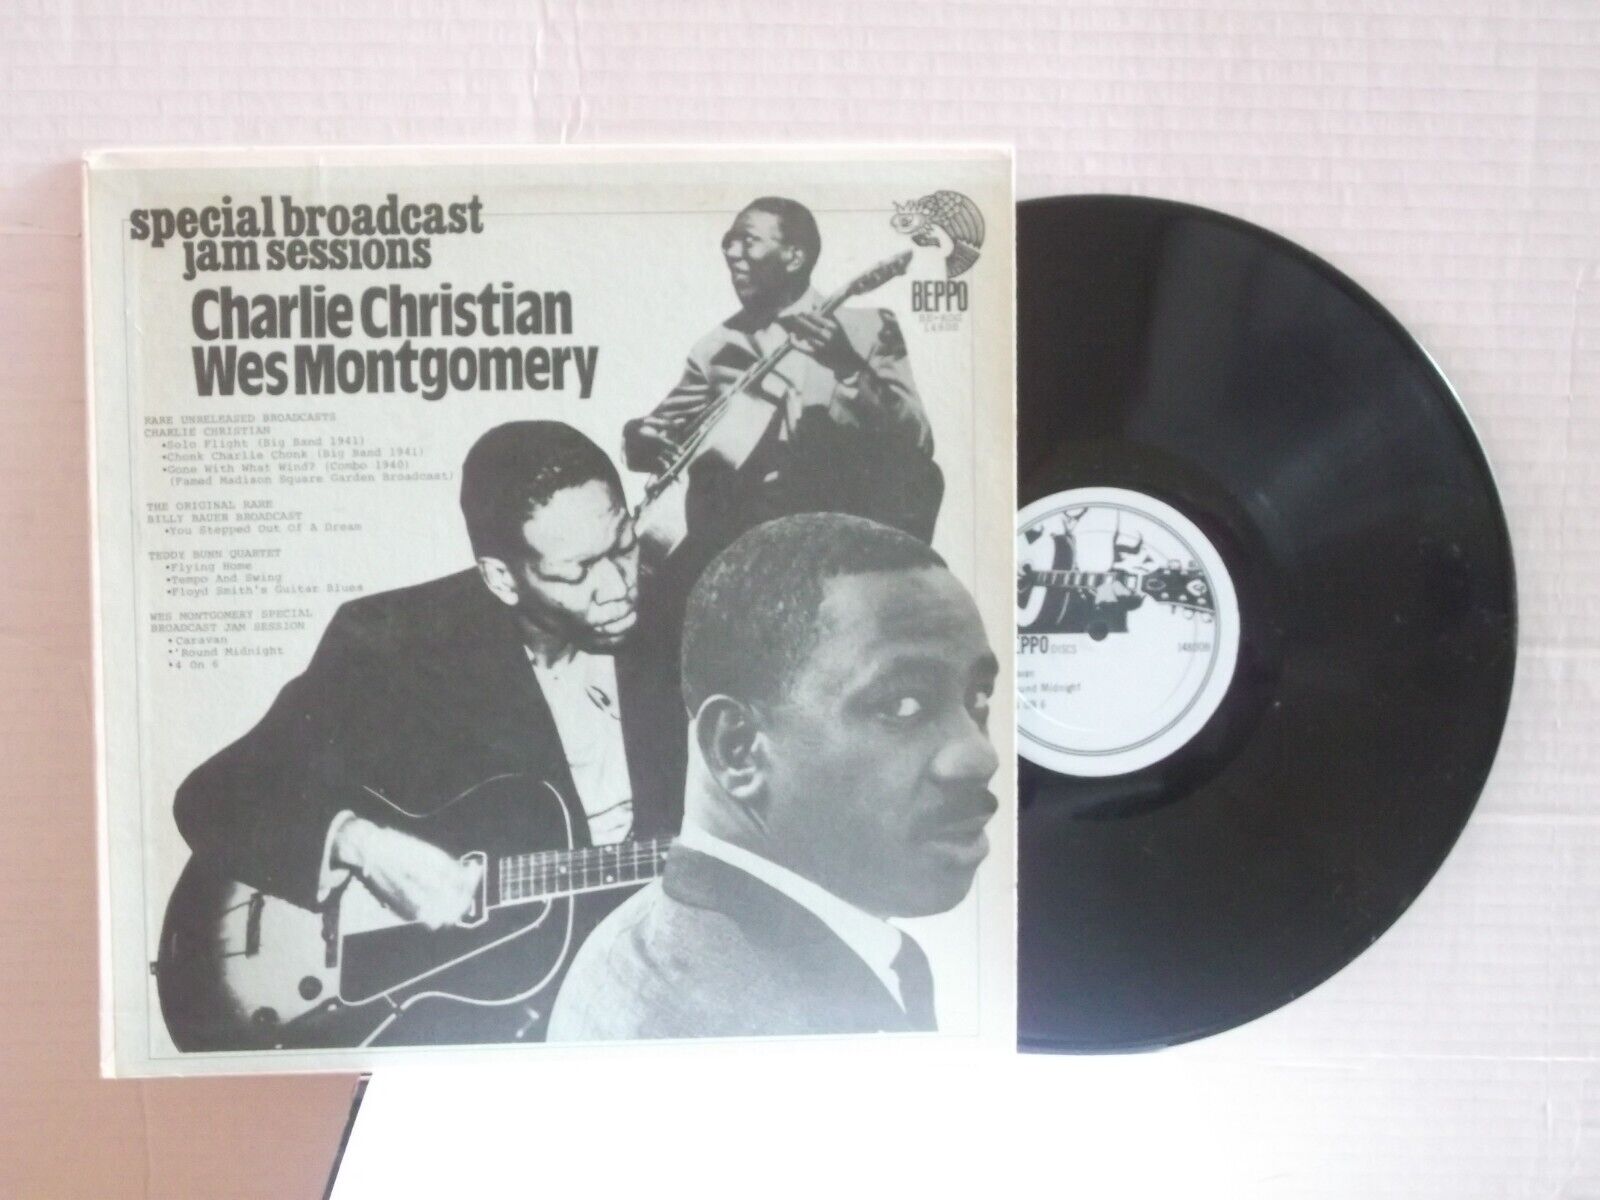 Charlie Christian,Wes Montgomery,Beppo,\